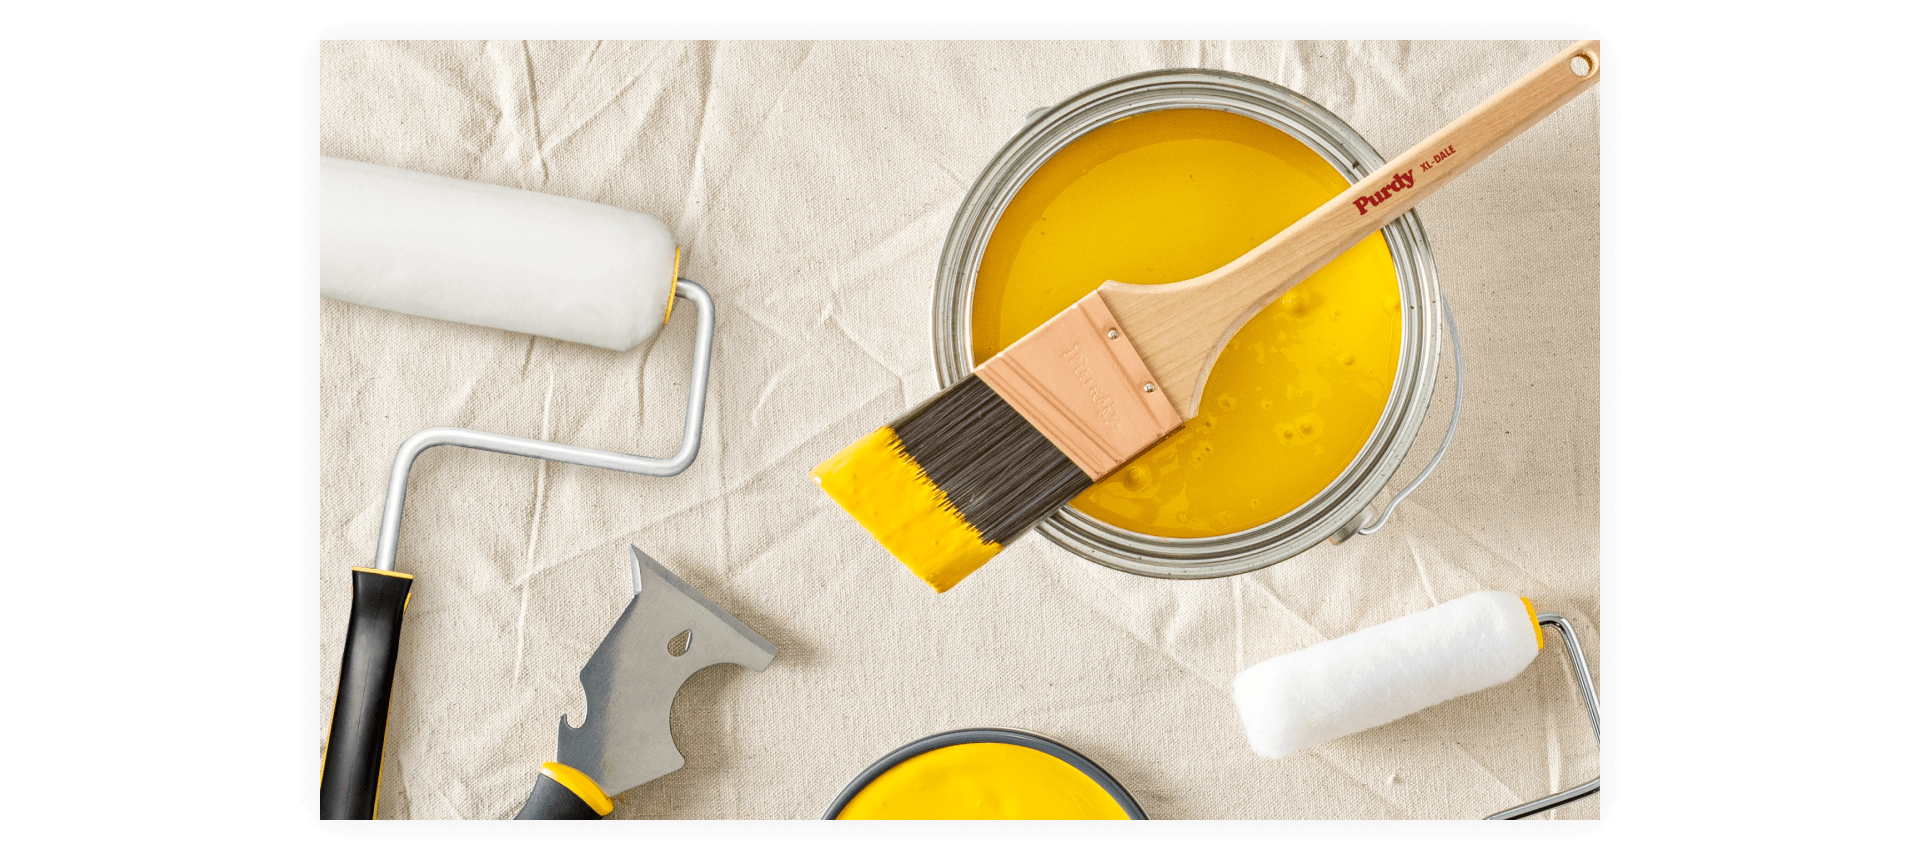 A Purdy paint brush set across an open can of yellow paint with other supplies nearby on a drop cloth.